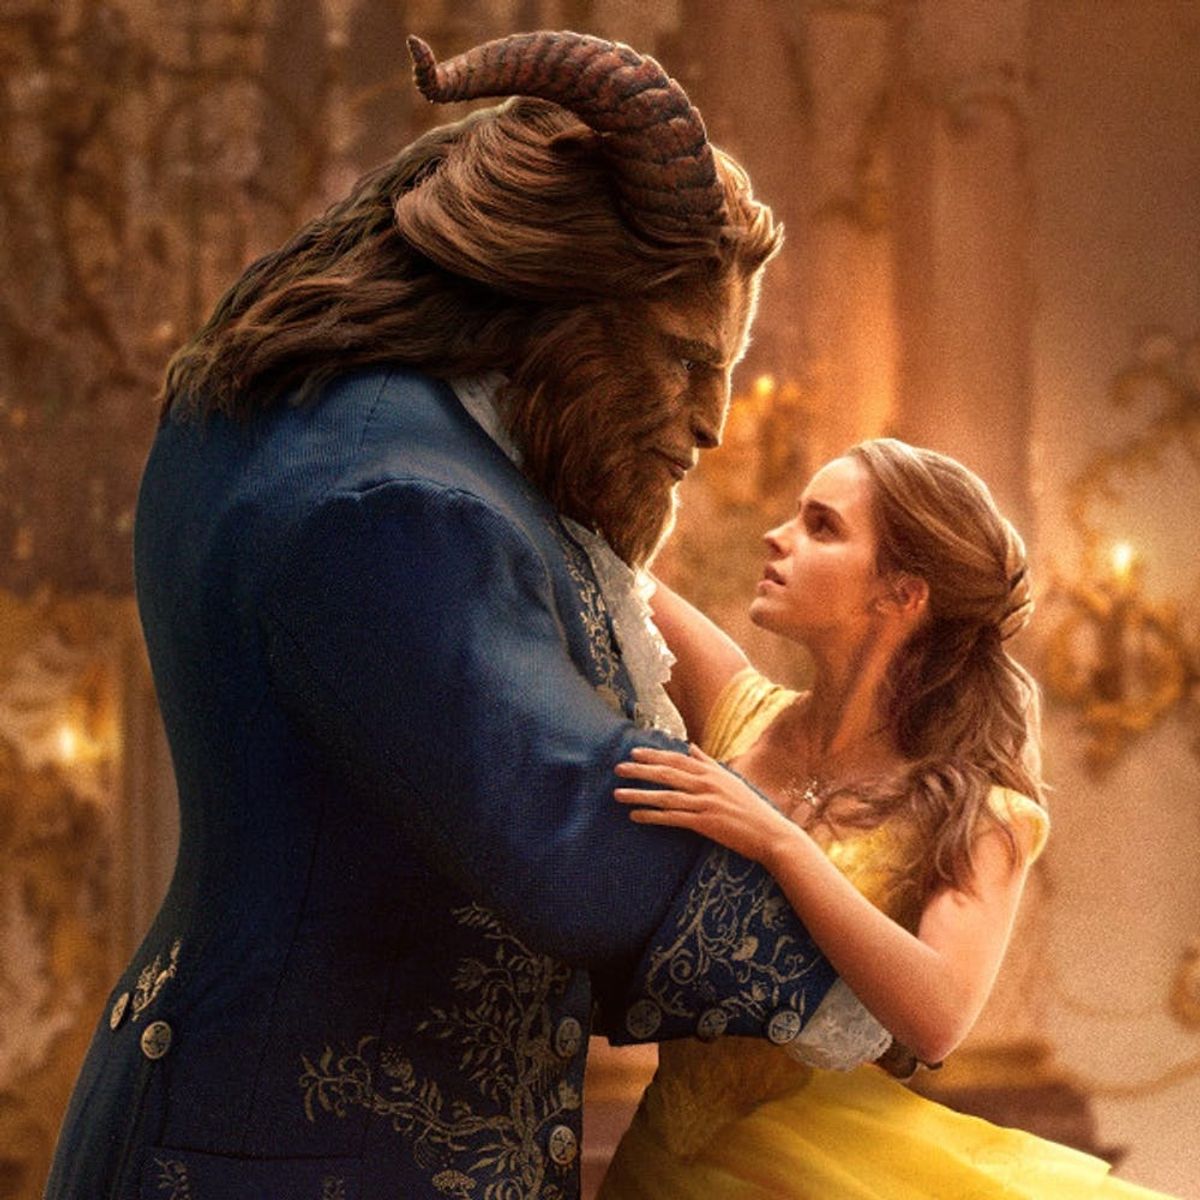 The Final Beauty and the Beast Trailer Brings the Fairy-Tale Magic to Life